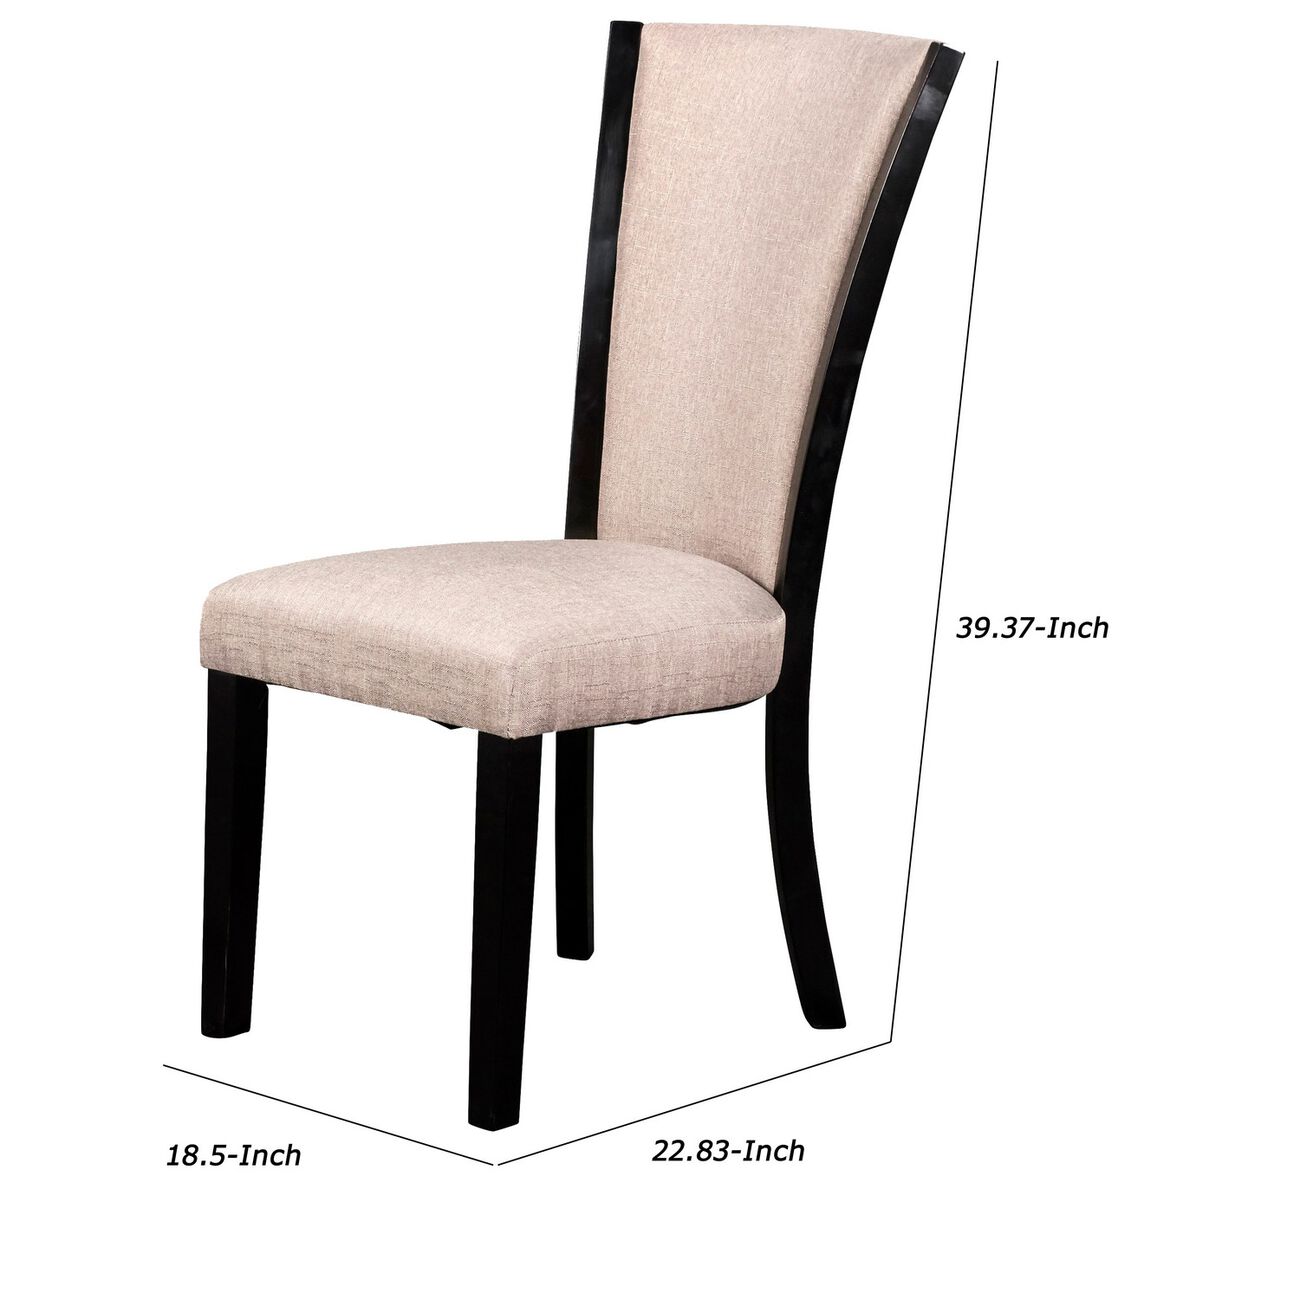 Wooden Dining Chair with Fabric Seat and Backrest, Set of 2,Black and Beige